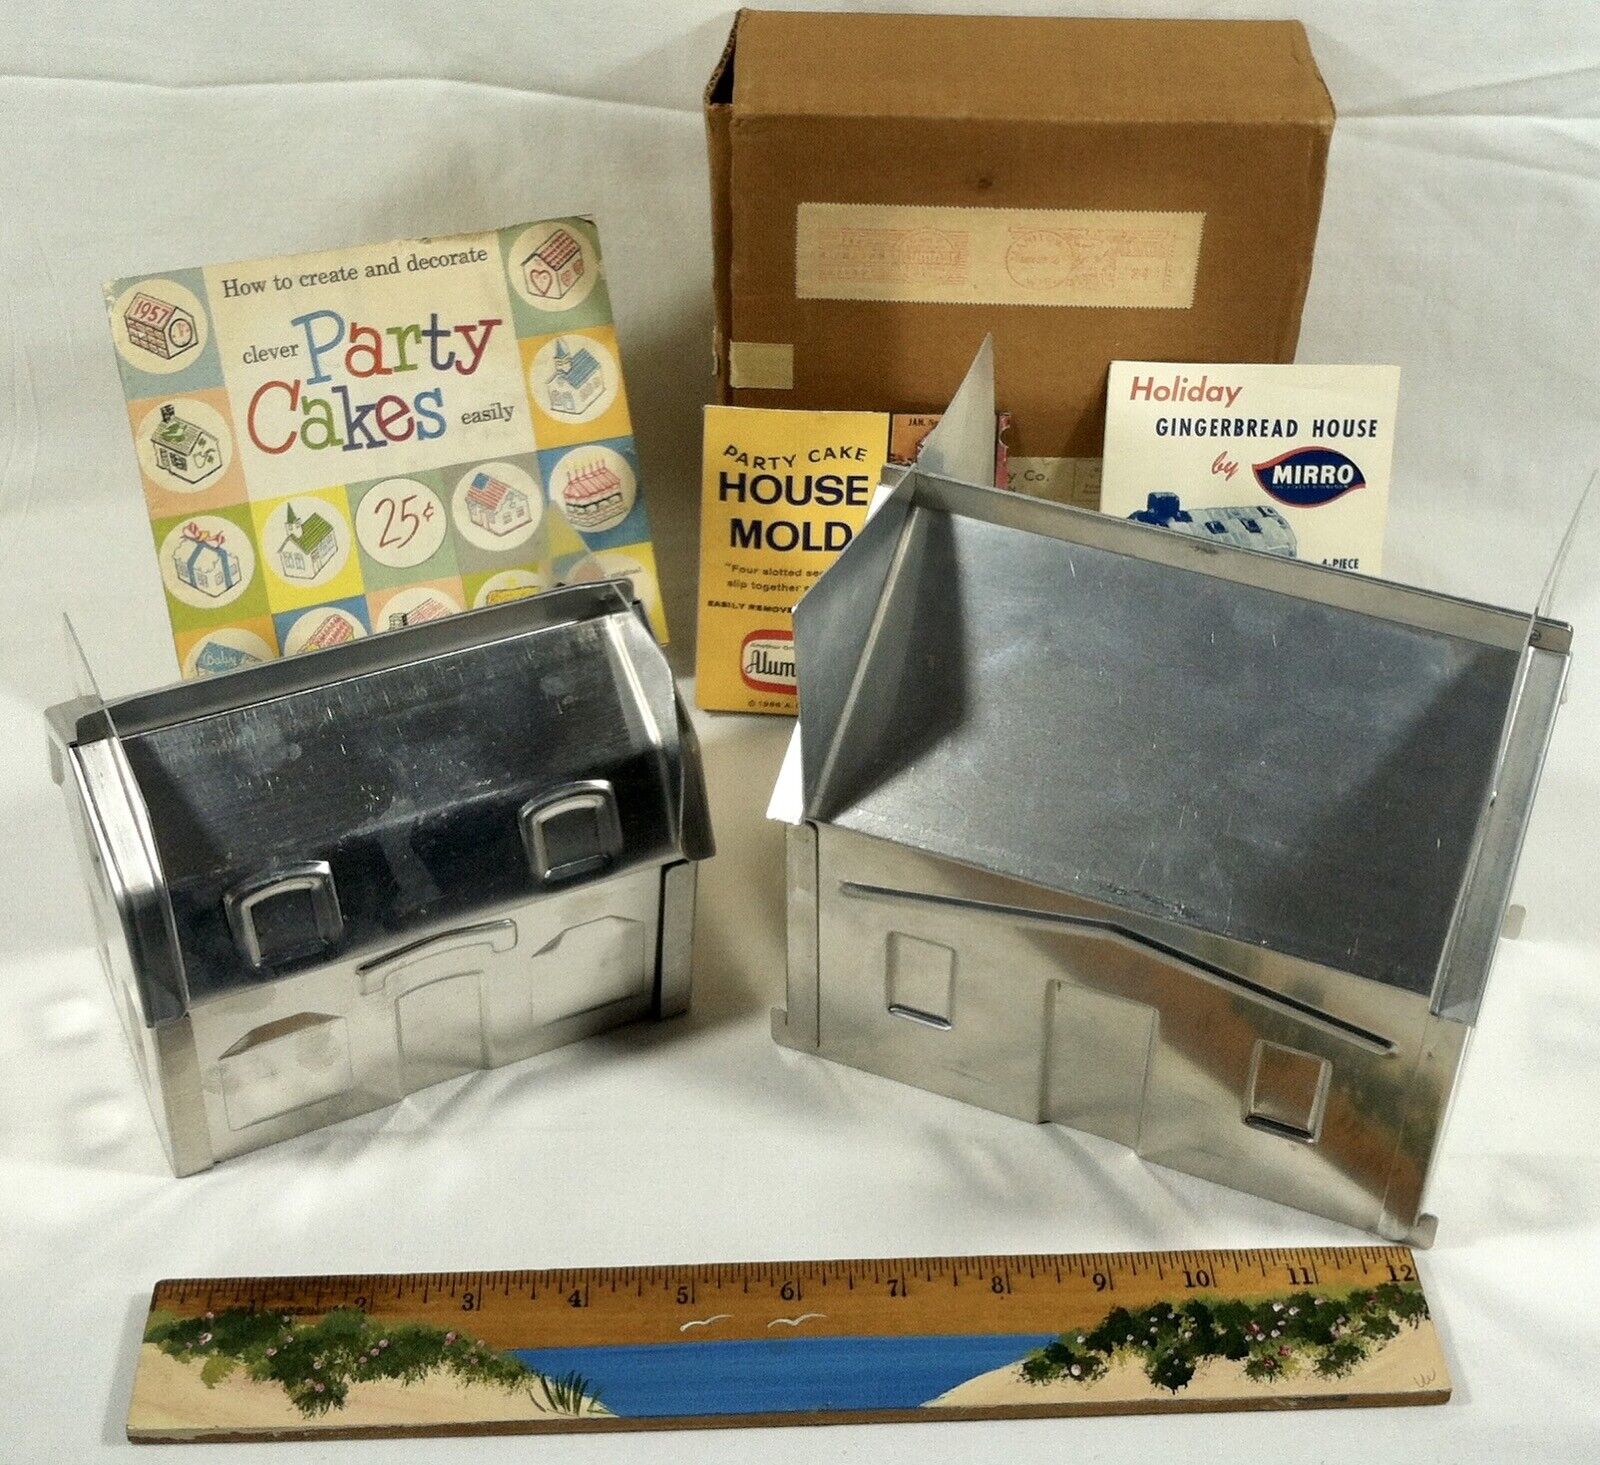 Vtg 1956 New Unused House Cake Mold Pan Set of 2 w Papers Original Box Pat Pend